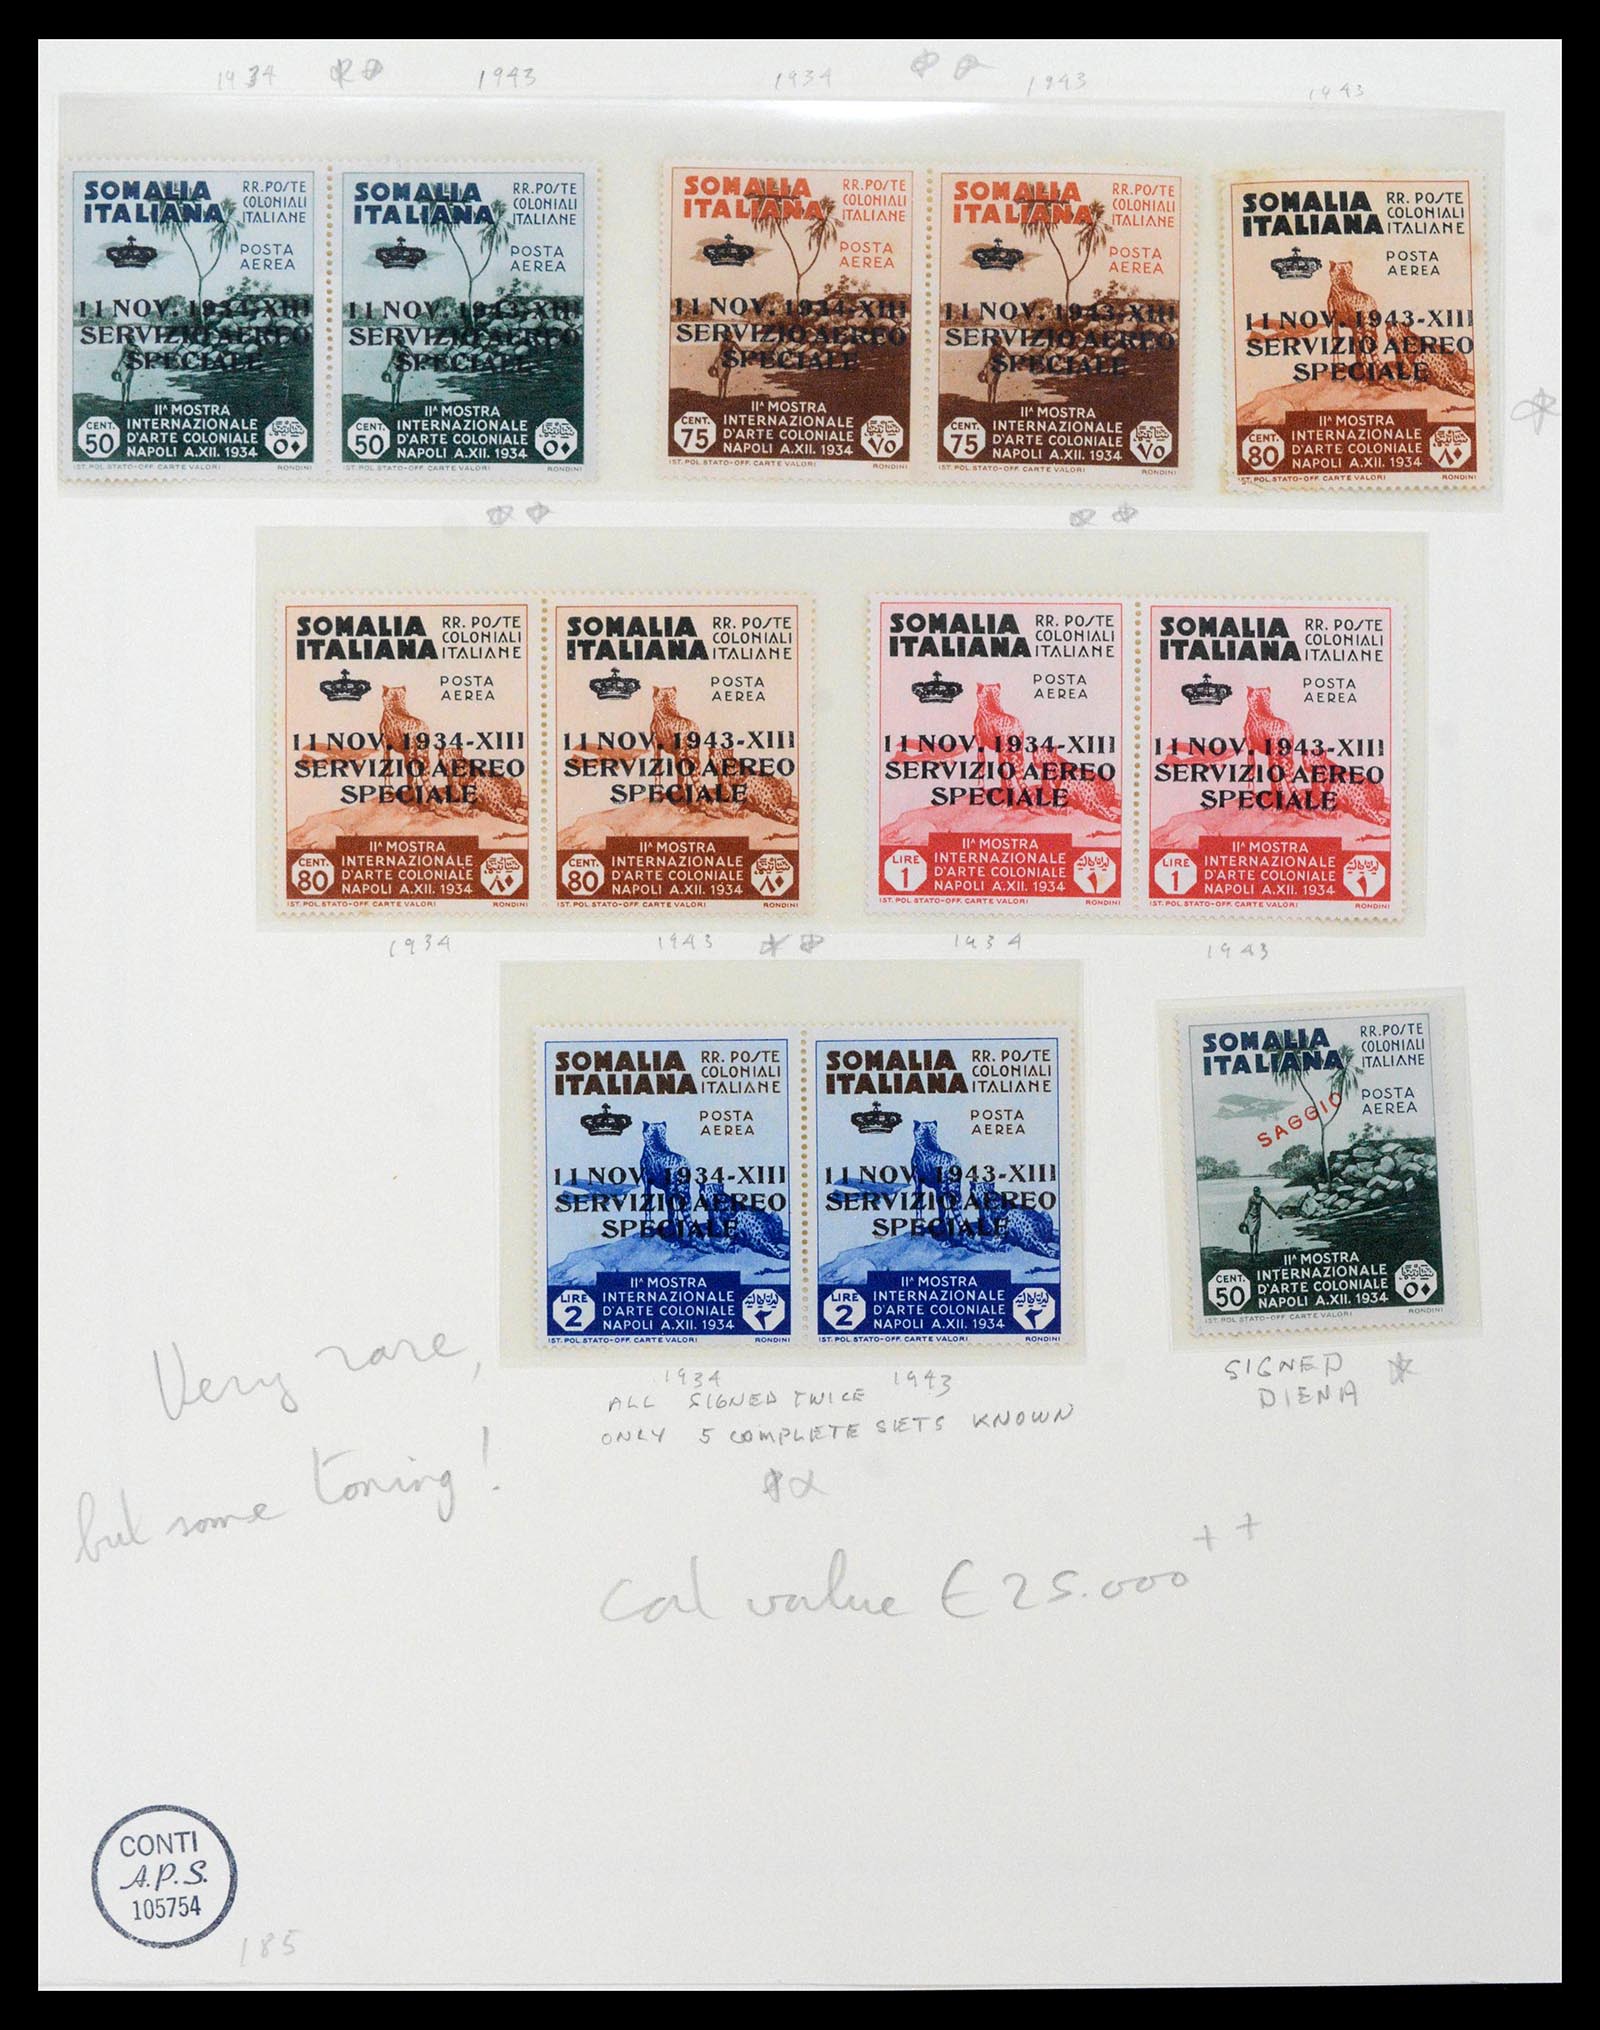 39011 0038 - Stamp collection 39011 Somalia complete 1903-1960.